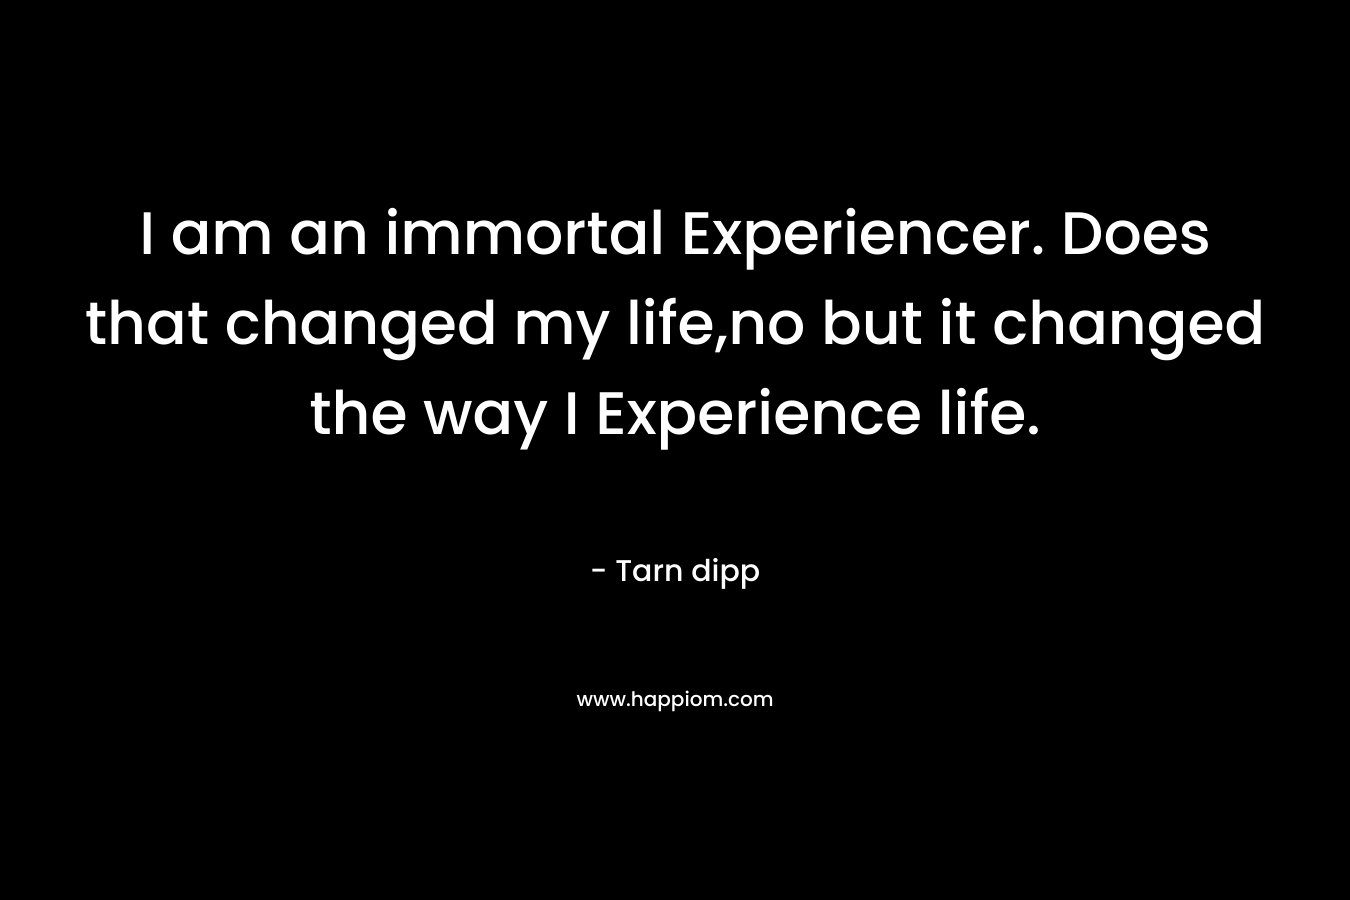 I am an immortal Experiencer. Does that changed my life,no but it changed the way I Experience life.